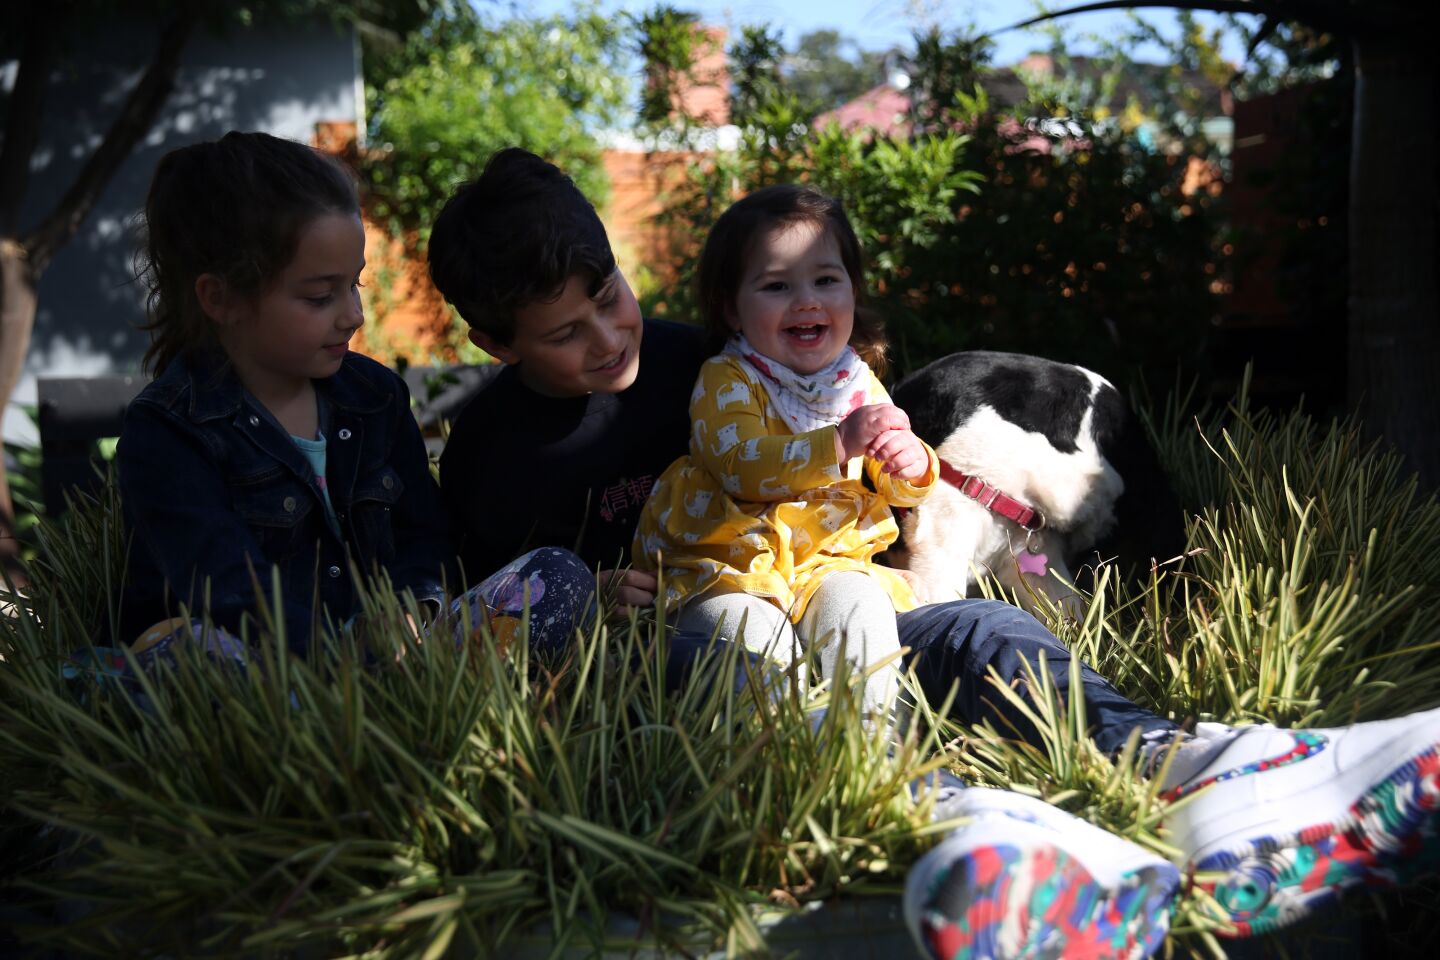 Nili, Ari and Talia Glatstein, left to right, play with their dog Bing Bong on a tub of variegated St. Augustine grass.